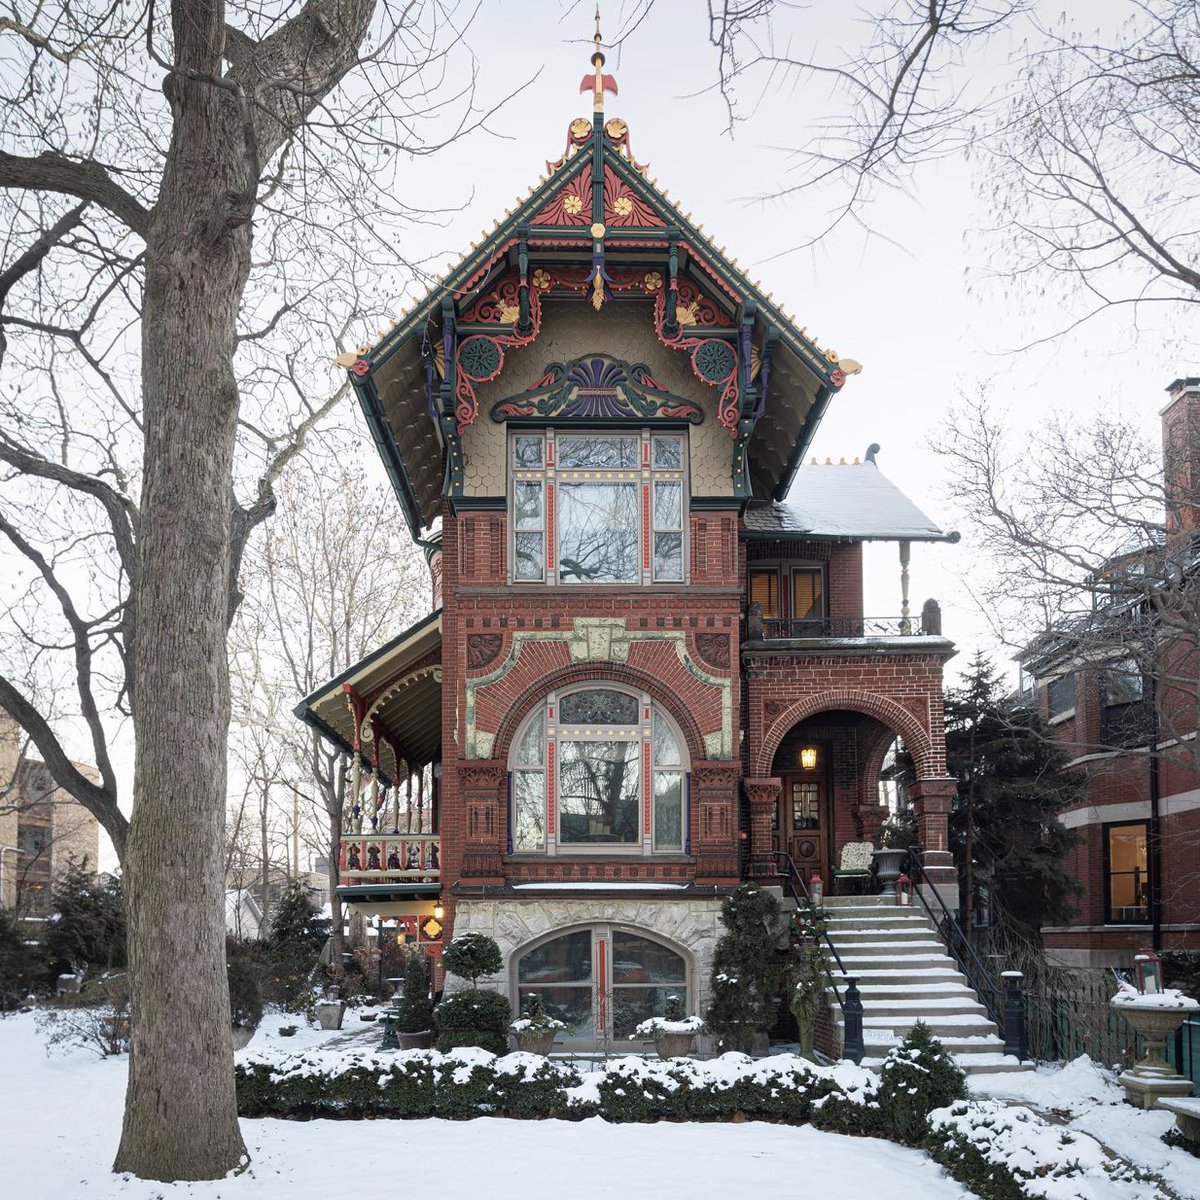 Oooooo! We're loving this dazzling home posted by @brickofchicago on Instagram. So much detail! W. Pierce Ave. Wicker Park. #Chicago #architecture #design #Victoriandesign #WickerPark #gingerbread